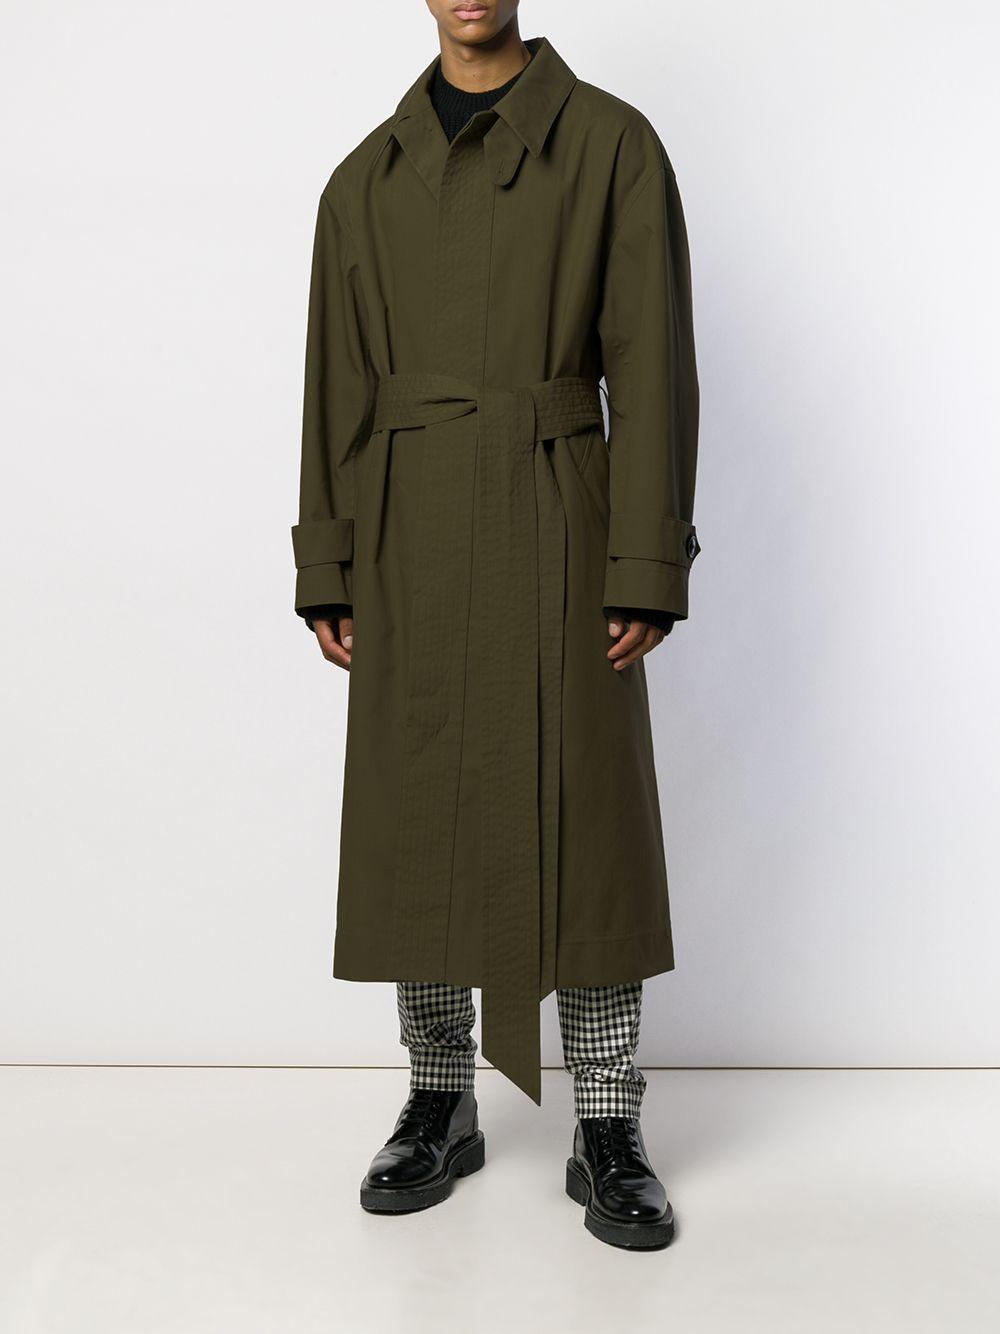 AMI Oversized Belted Trench Coat in Green for Men - Lyst